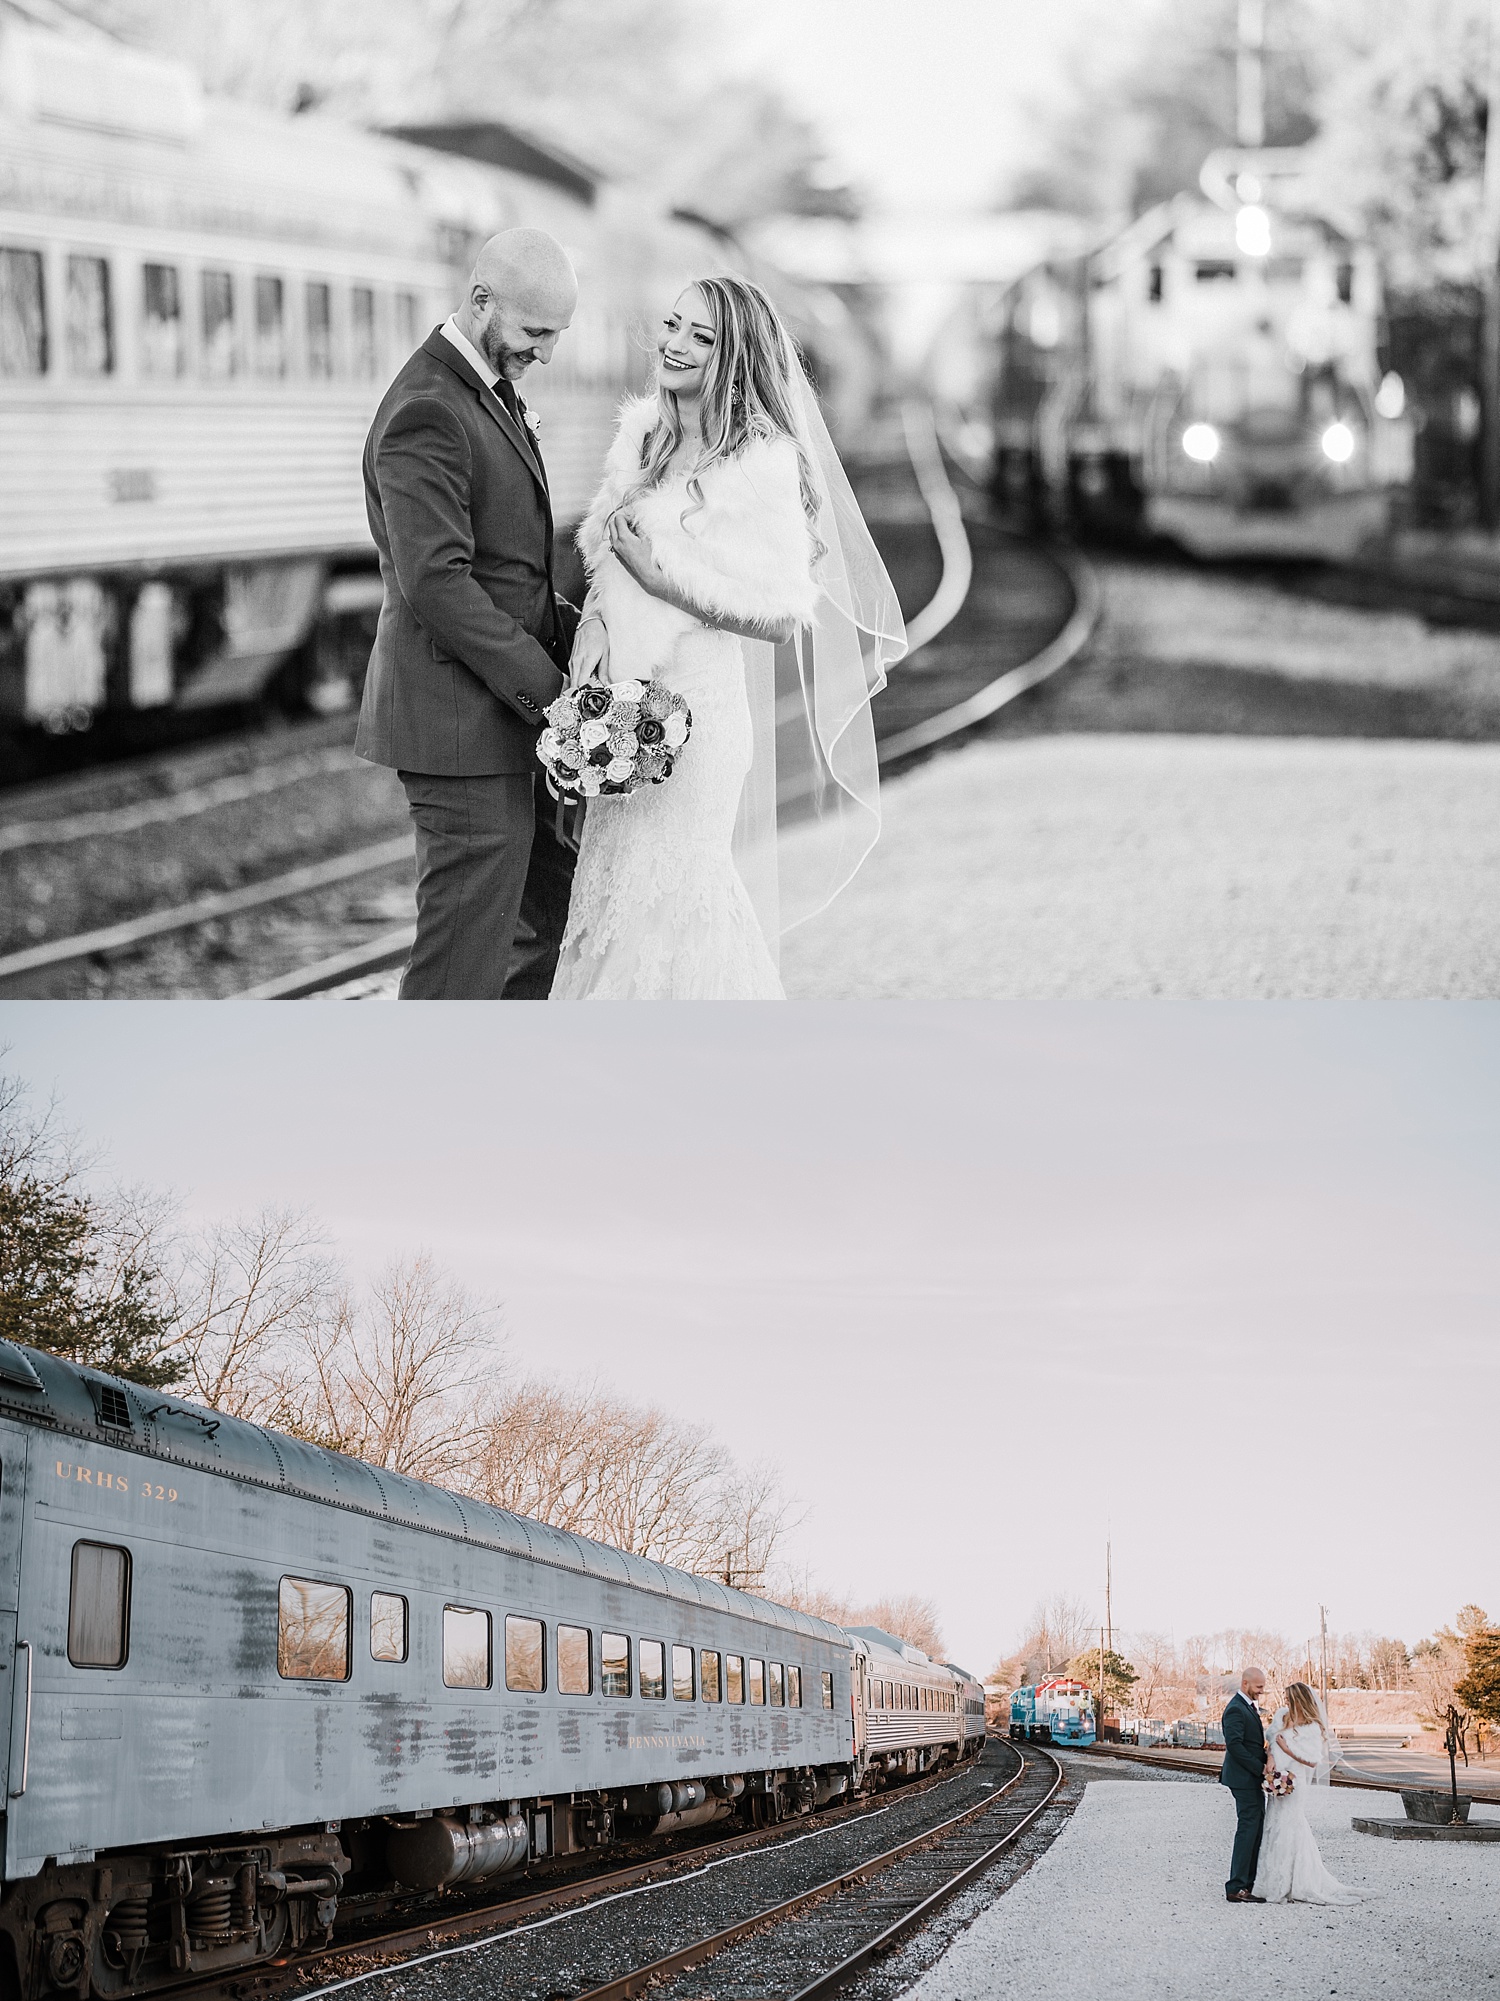 Everly at Railroad Tuckahoe New Jersey wedding photographer